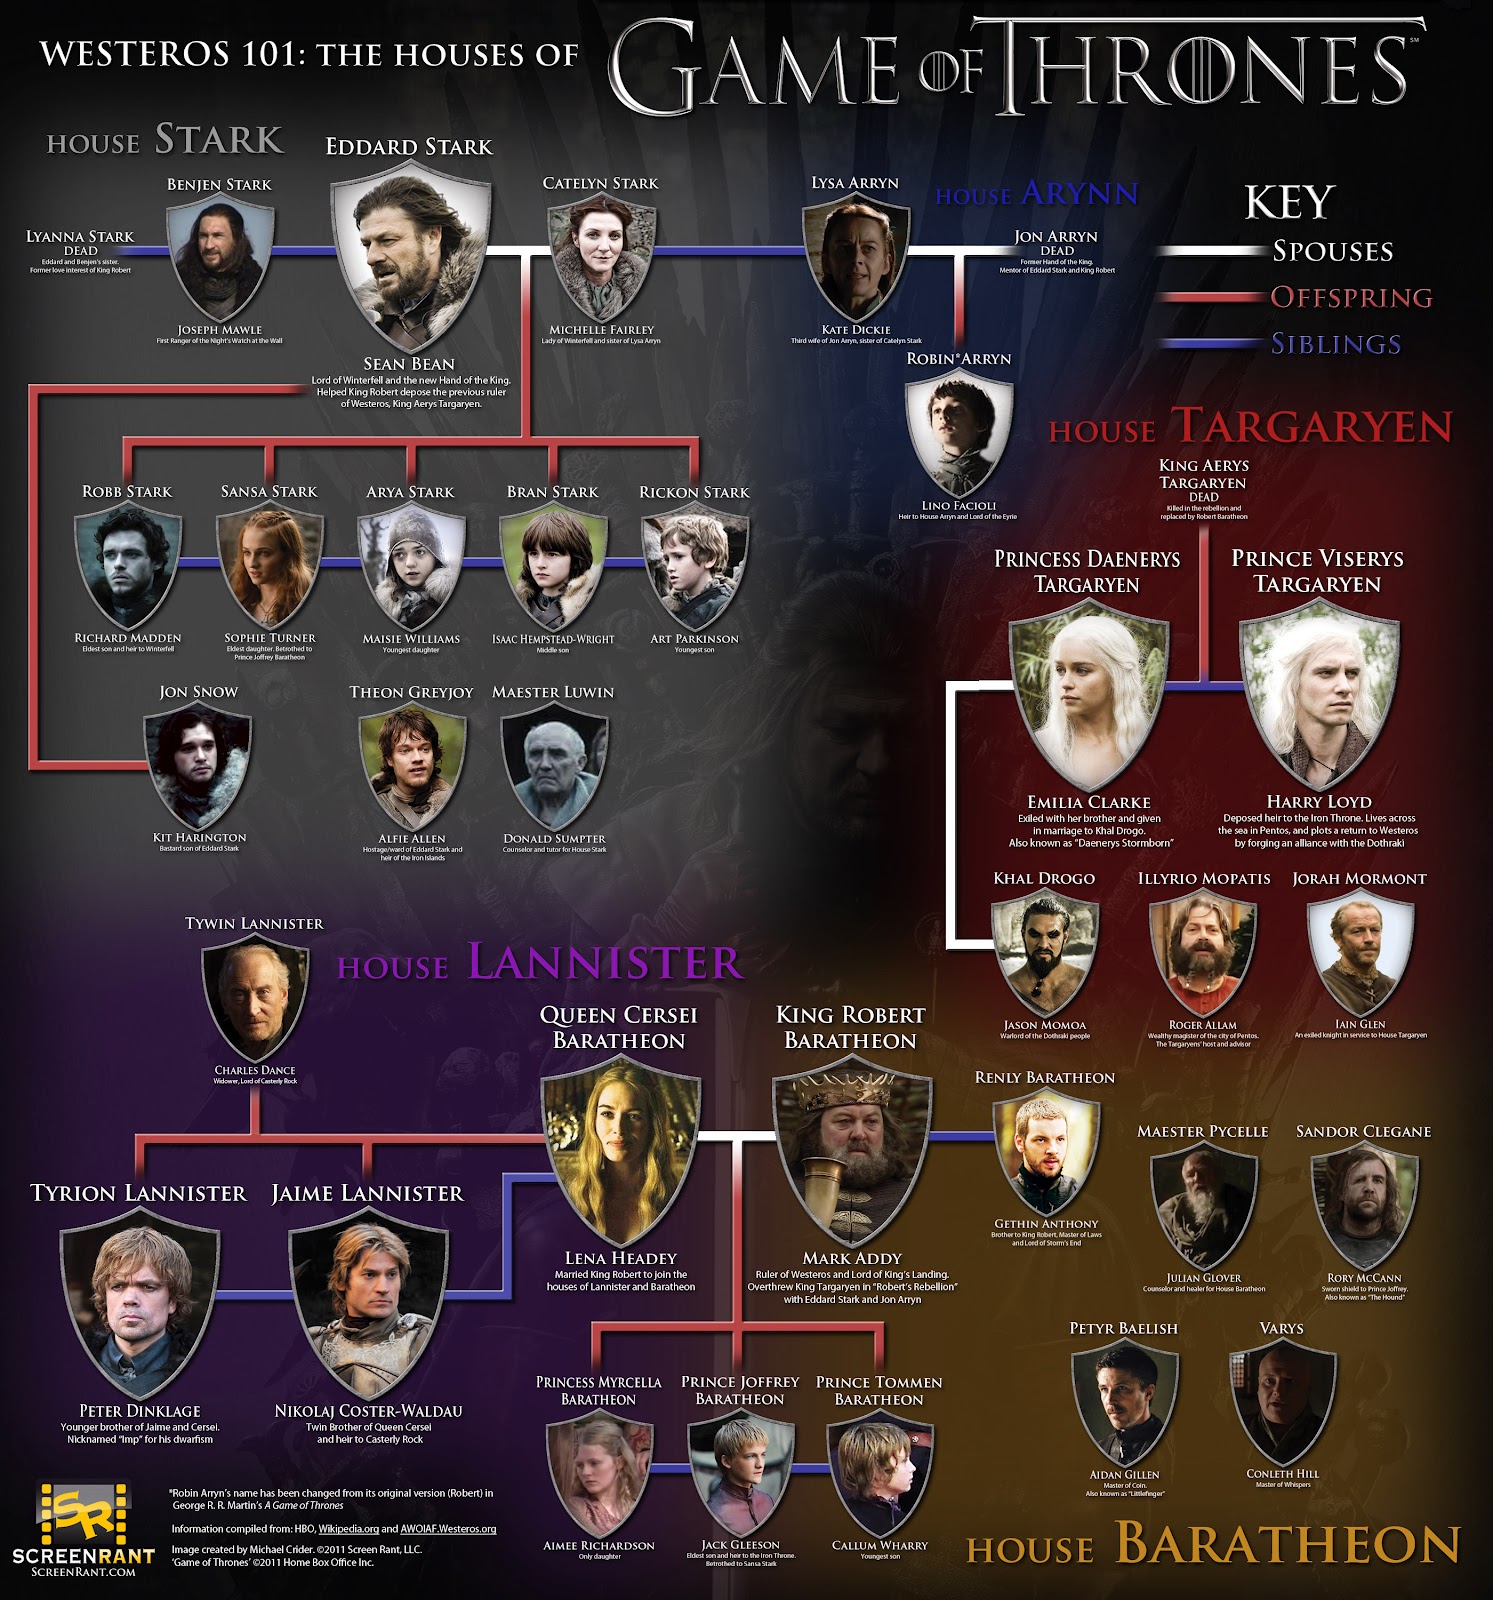 Fangs For The Fantasy: Game of Thrones, Season 1, Episode 10: Fire and